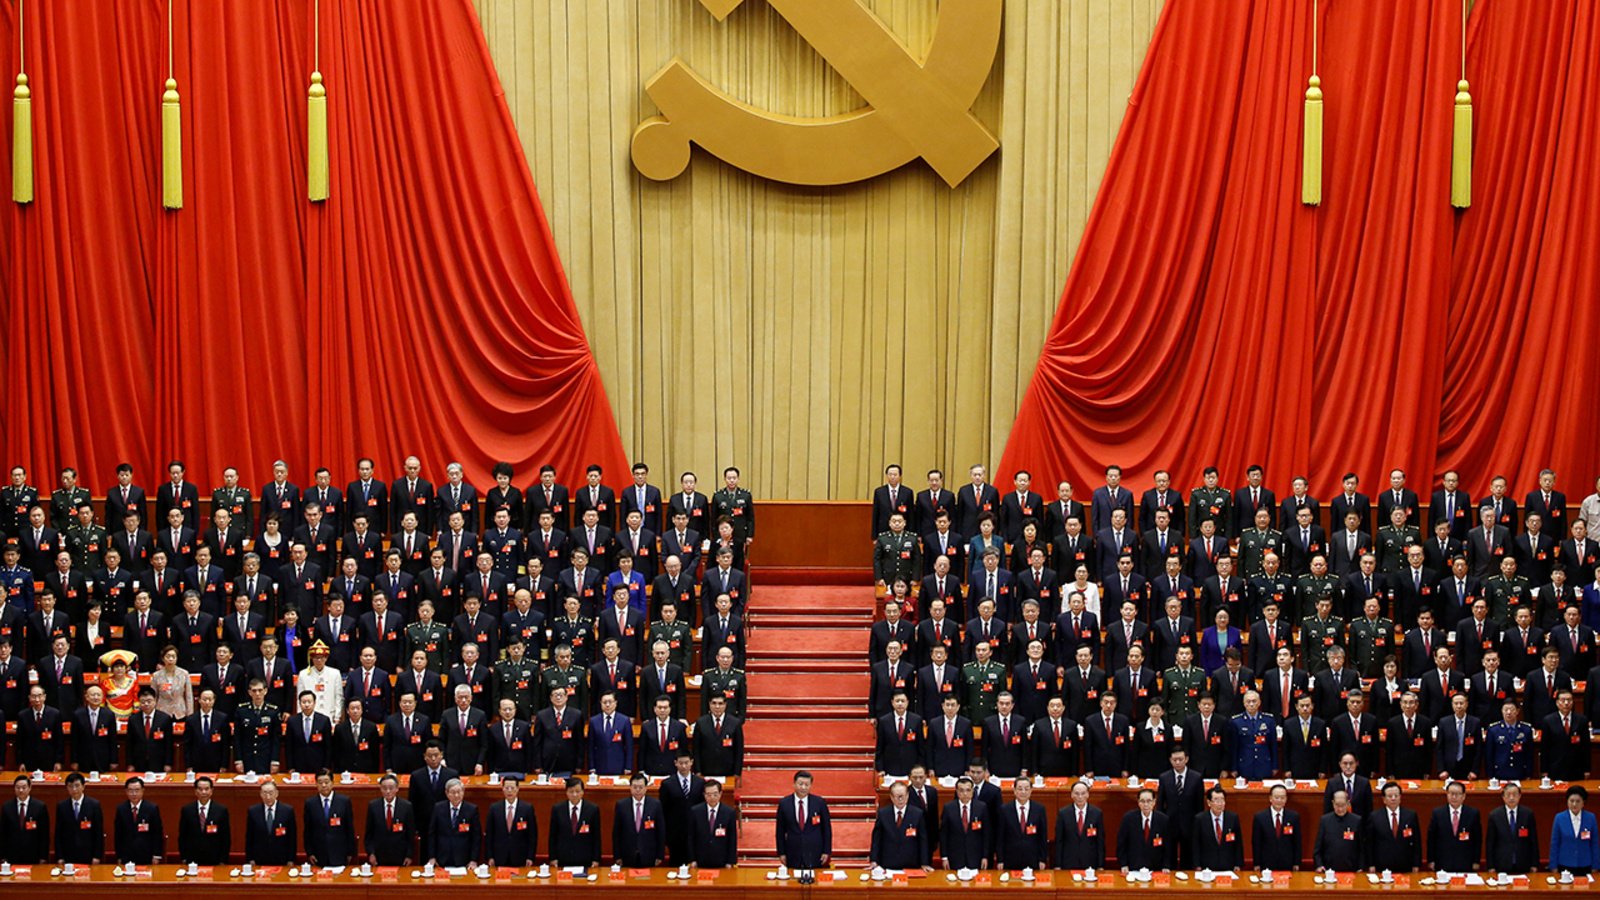 Chaina Seepingsex - The Chinese Communist Party | Council on Foreign Relations